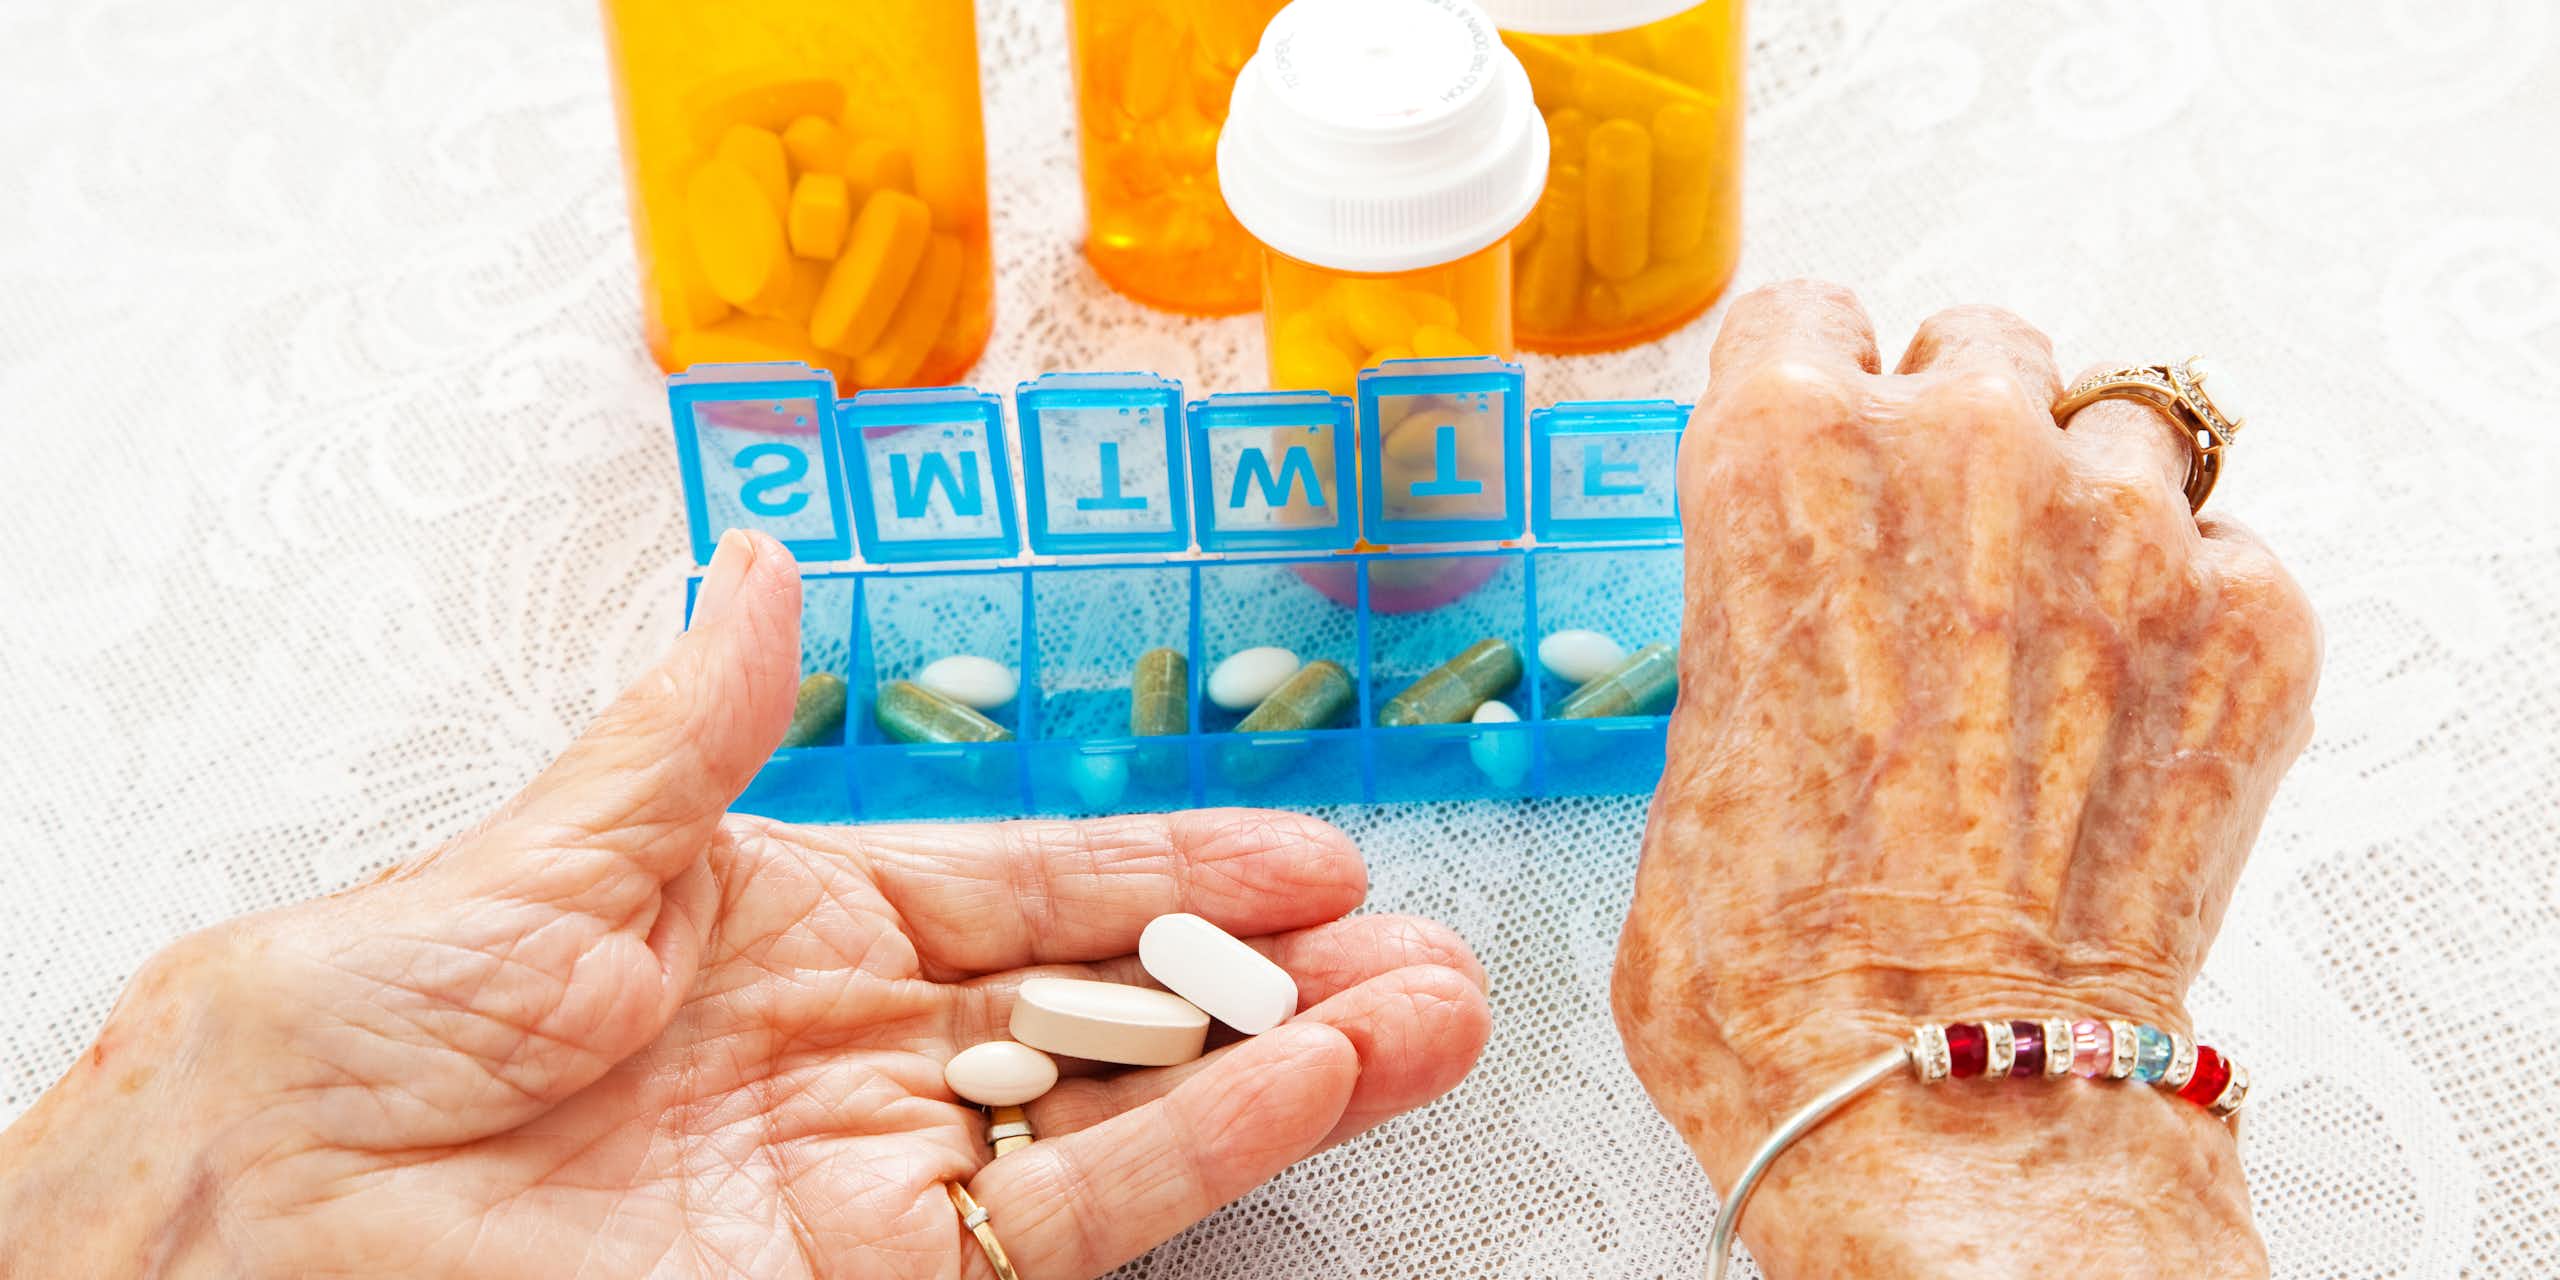 The hands of an elderly person taking medication in a box